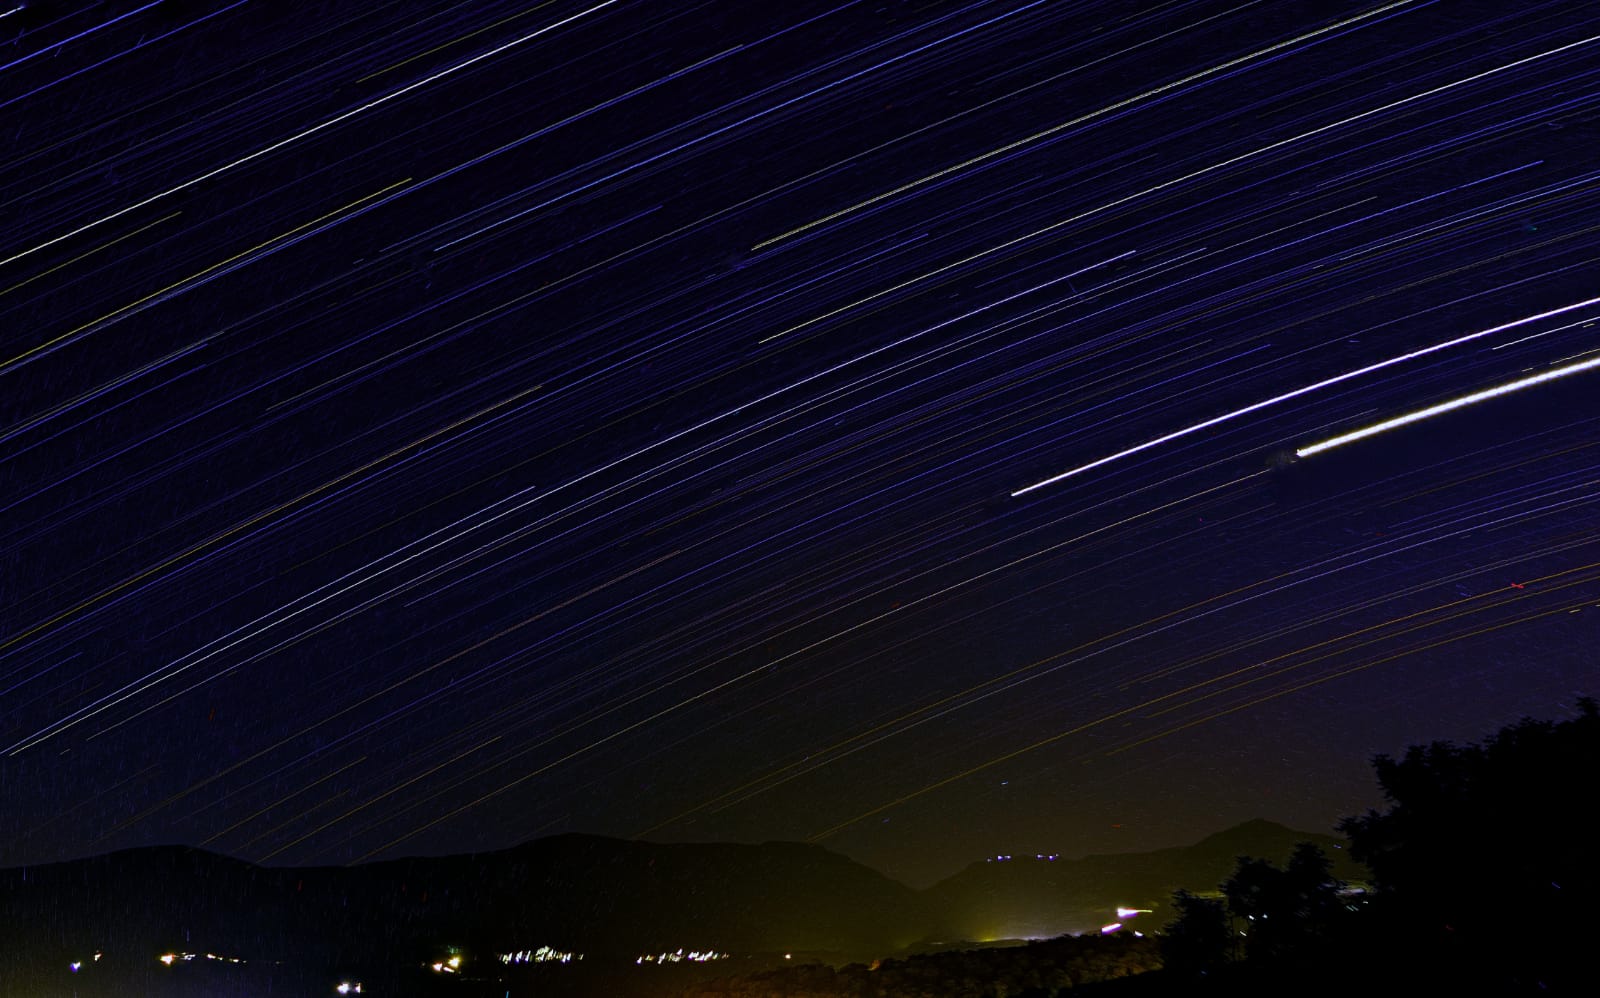 Time-lapse star trails over Snowdonia